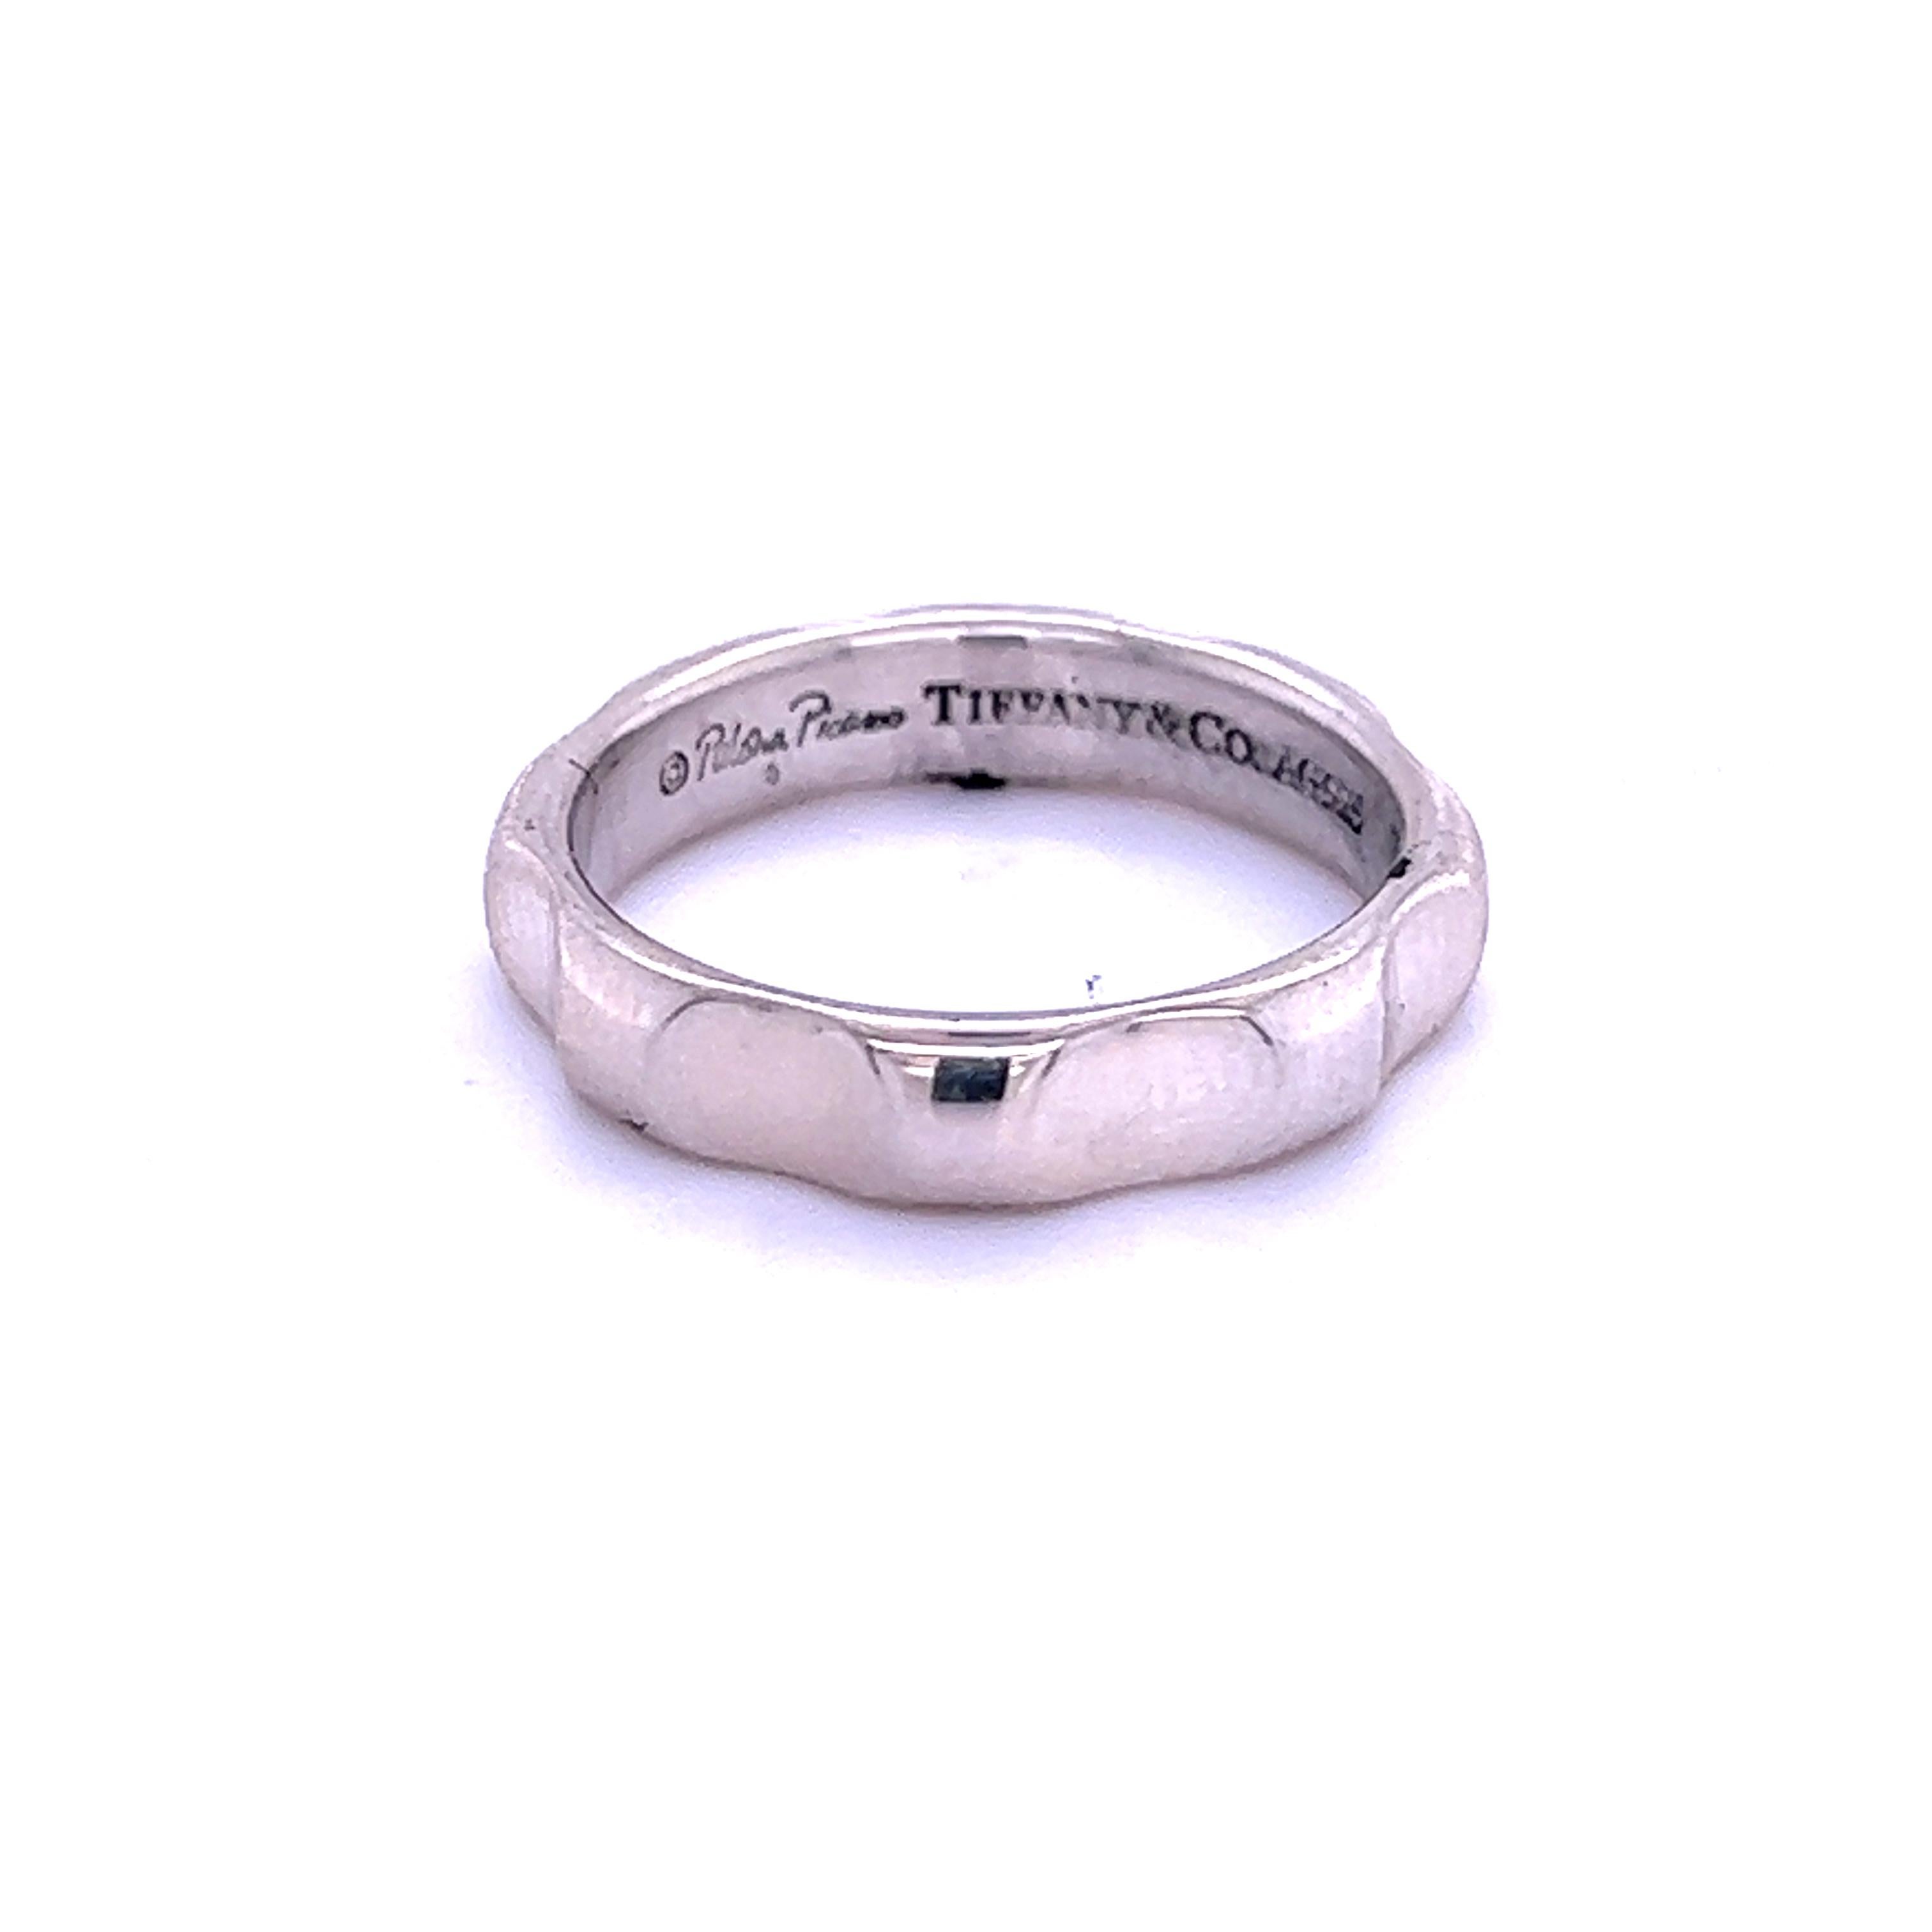 Authentic Tiffany & Co Estate Wave Band Size 6 Silver 3.85 mm TIF503

TRUSTED SELLER SINCE 2002

DETAILS
Style: Wave Band
Ring Size: 6
Height: 3.85 mm
Weight: 3.32 Grams
Metal: Sterling Silver

We try to present our estate items as best as possible